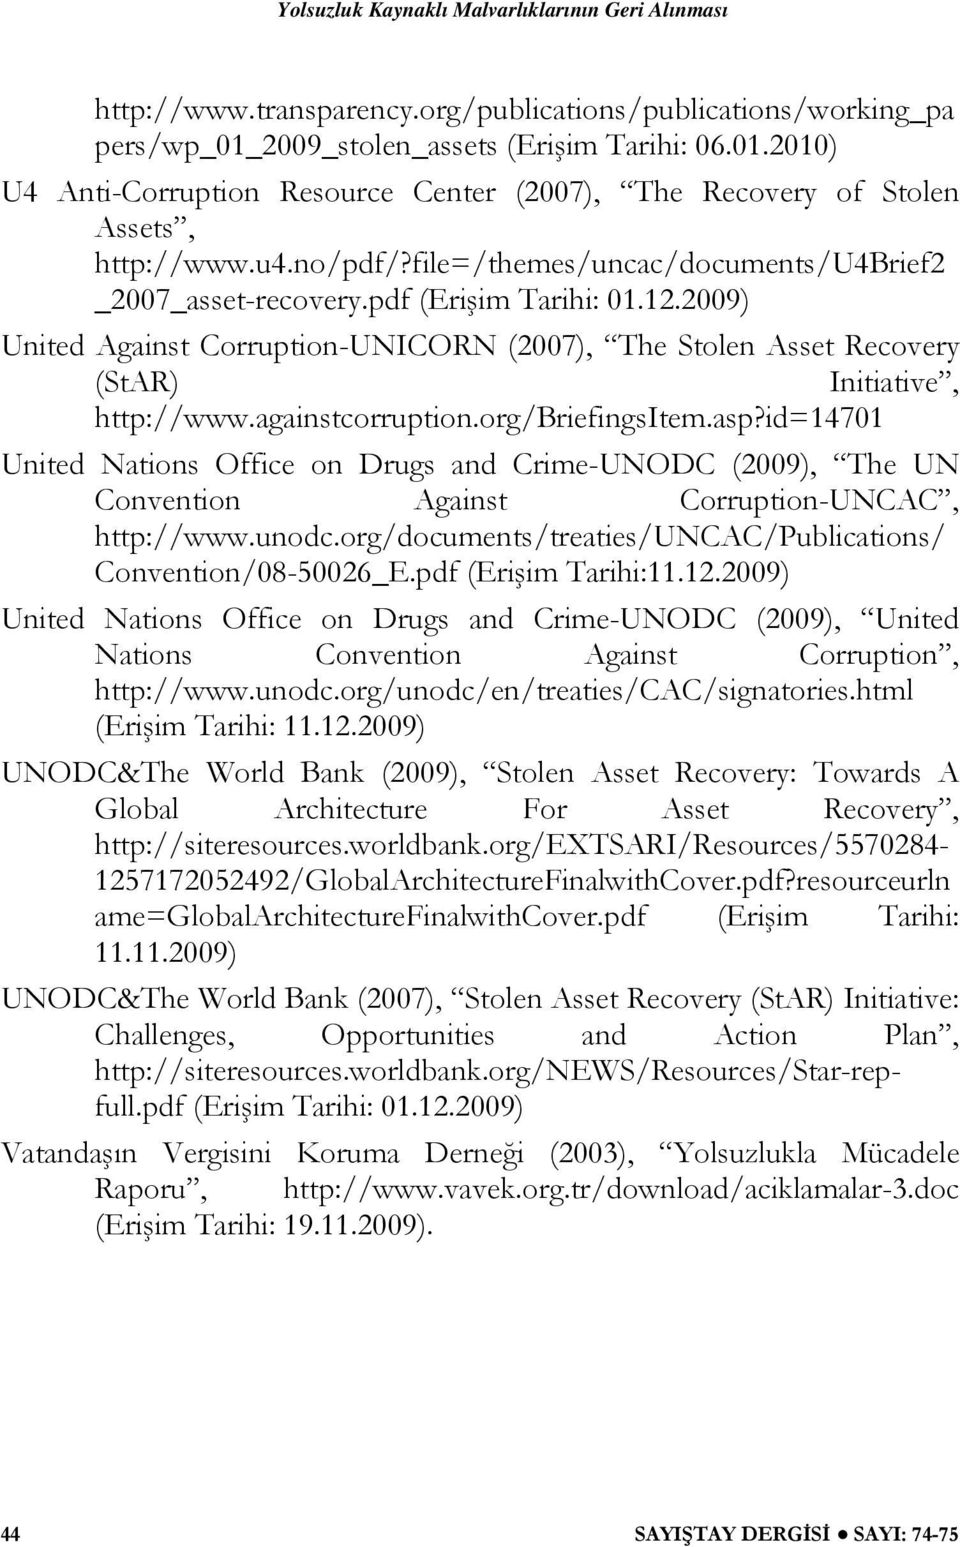 againstcorruption.org/briefingsitem.asp?id=14701 United Nations Office on Drugs and Crime-UNODC (2009), The UN Convention Against Corruption-UNCAC, http://www.unodc.